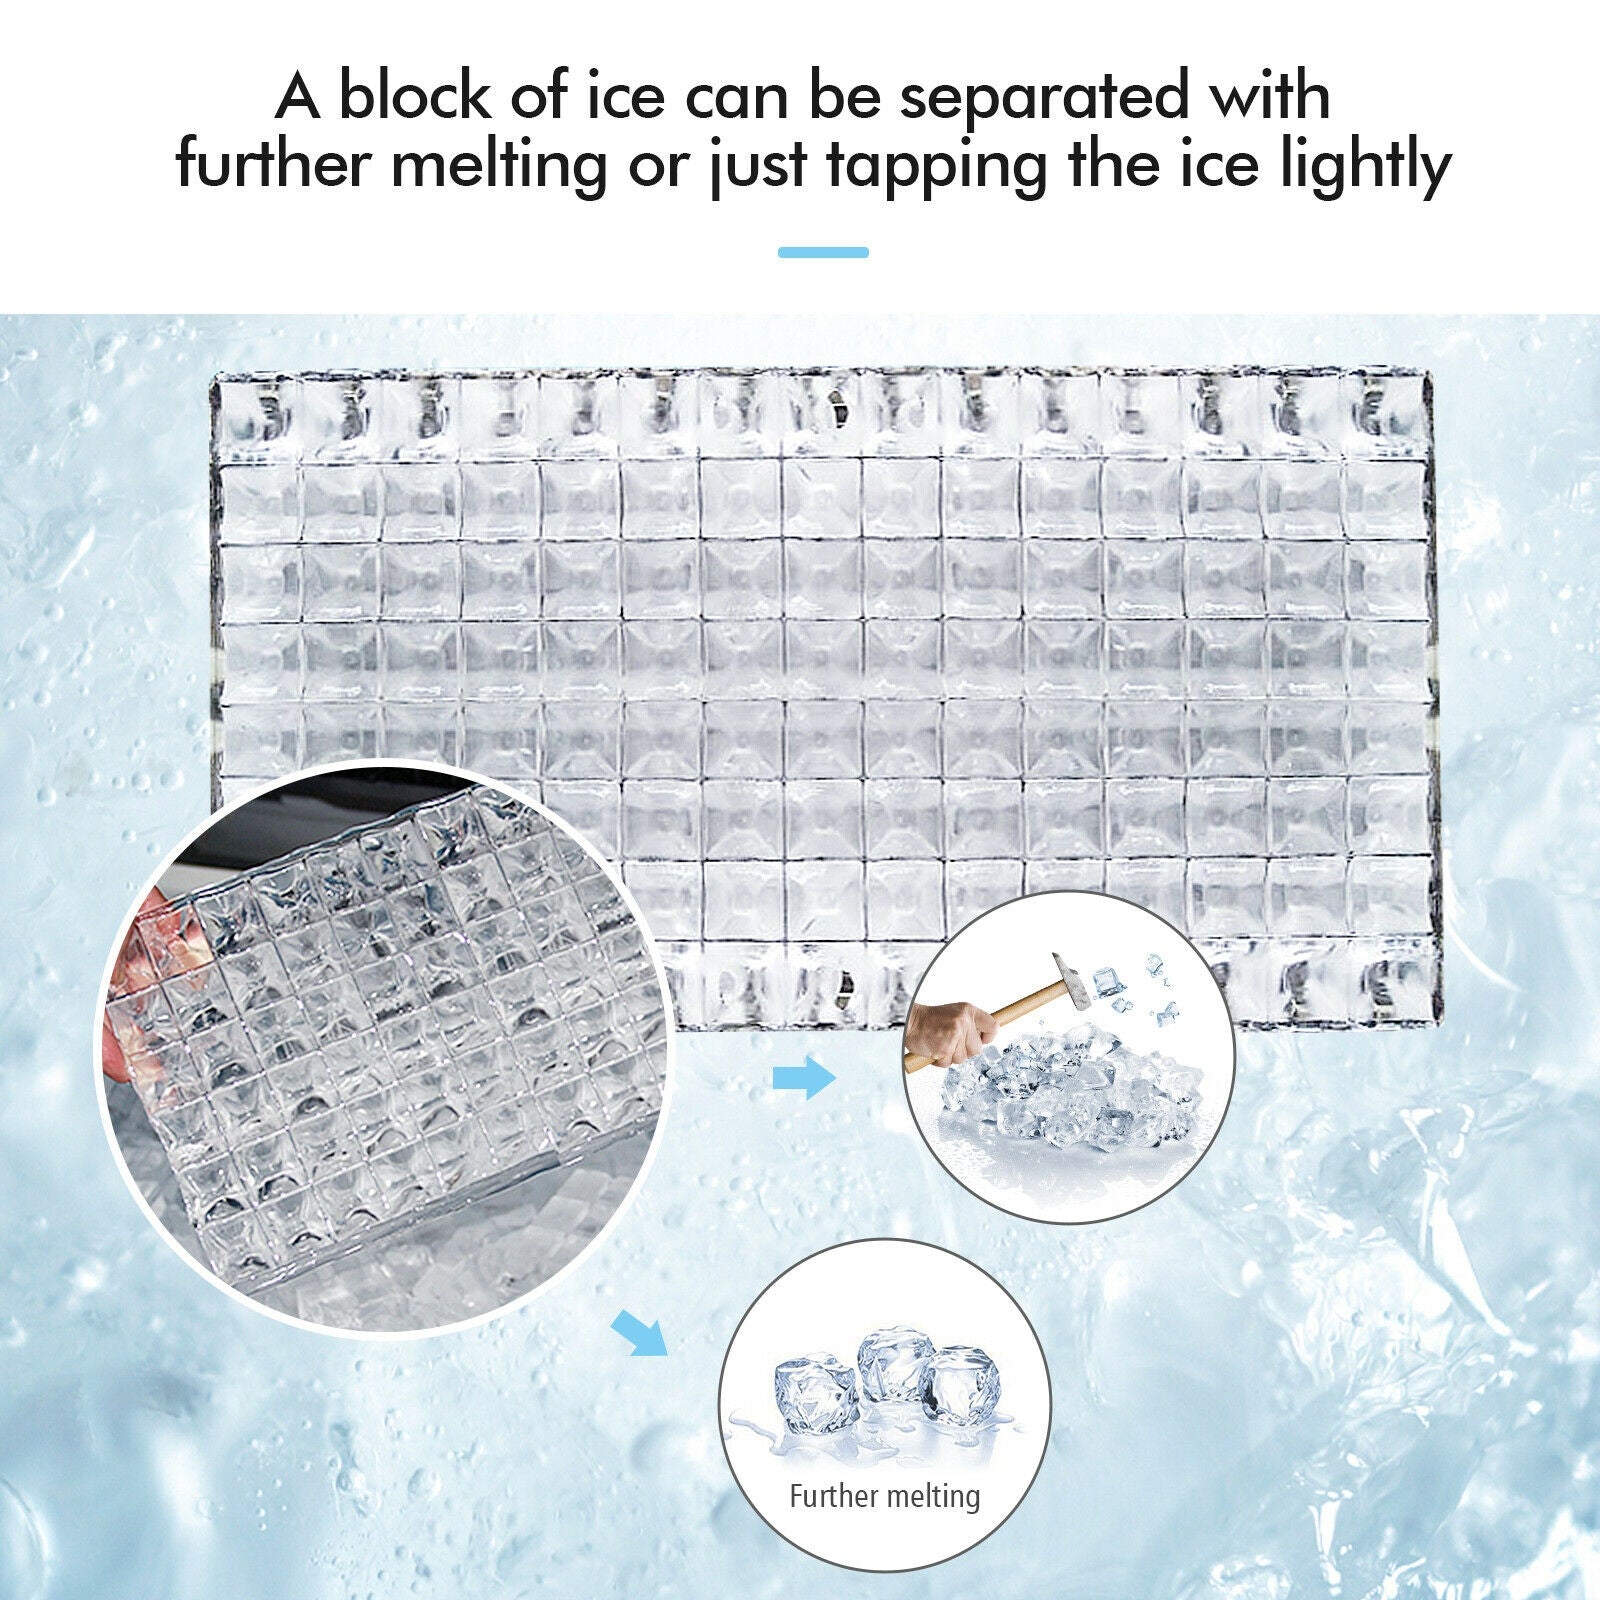 Rapid Ice Production: This commercial ice maker offers convenient and efficient ice-making capabilities. It can produce 48 clear ice cubes in just 12 to 18 minutes per cycle, and up to 110 lbs of ice in a 24-hour period. Each ice cube is a standard size of 0.9" x 0.9" x 0.9", making it ideal for mixed drinks or fitting into small water bottle openings.